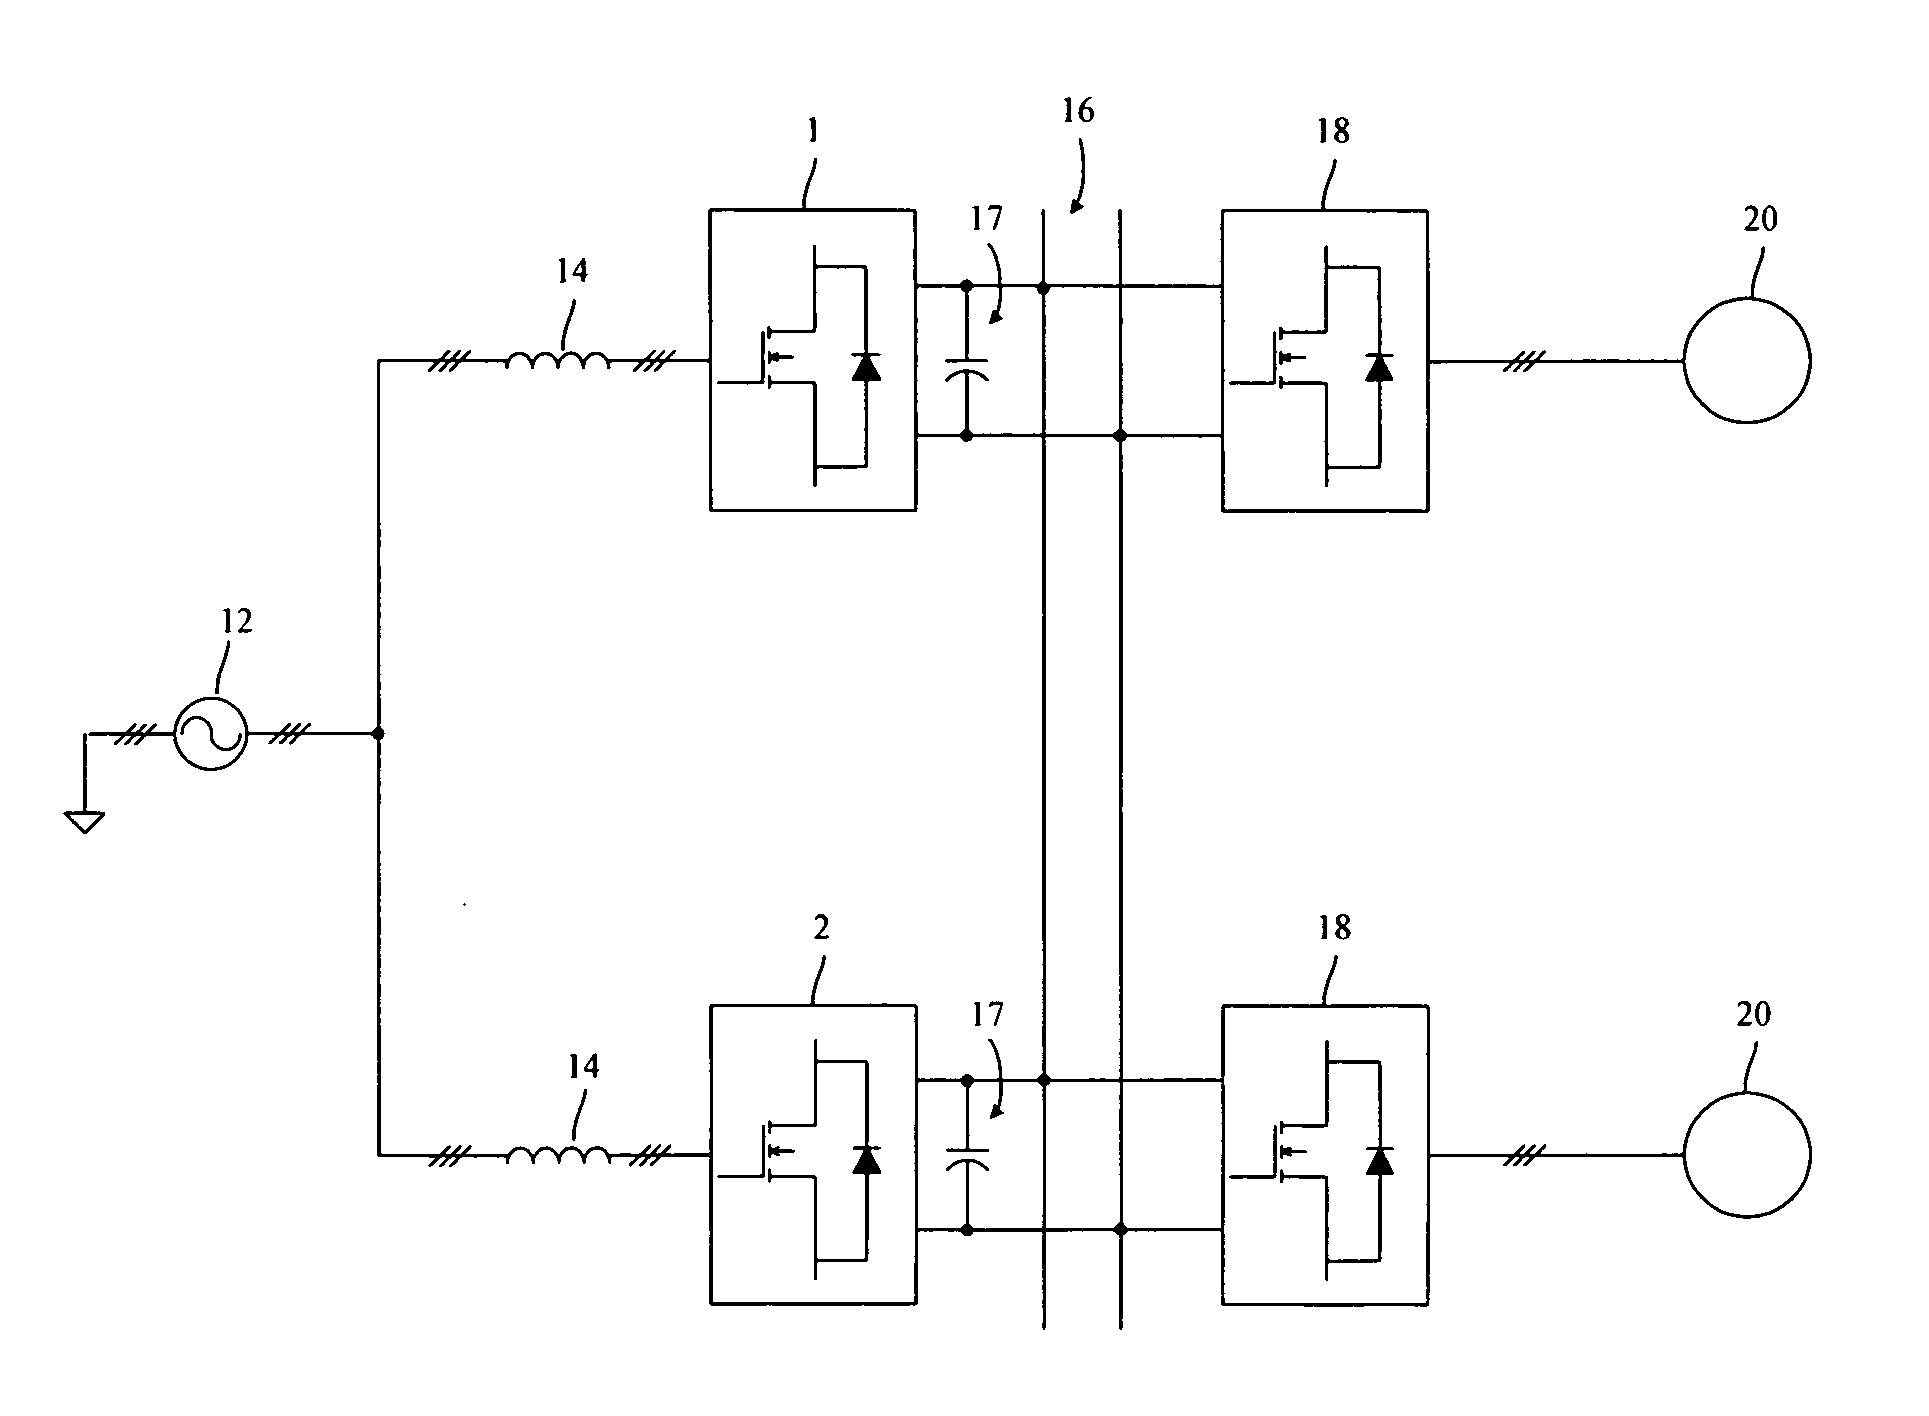 Control Methods for Parallel-Connected Power Converters